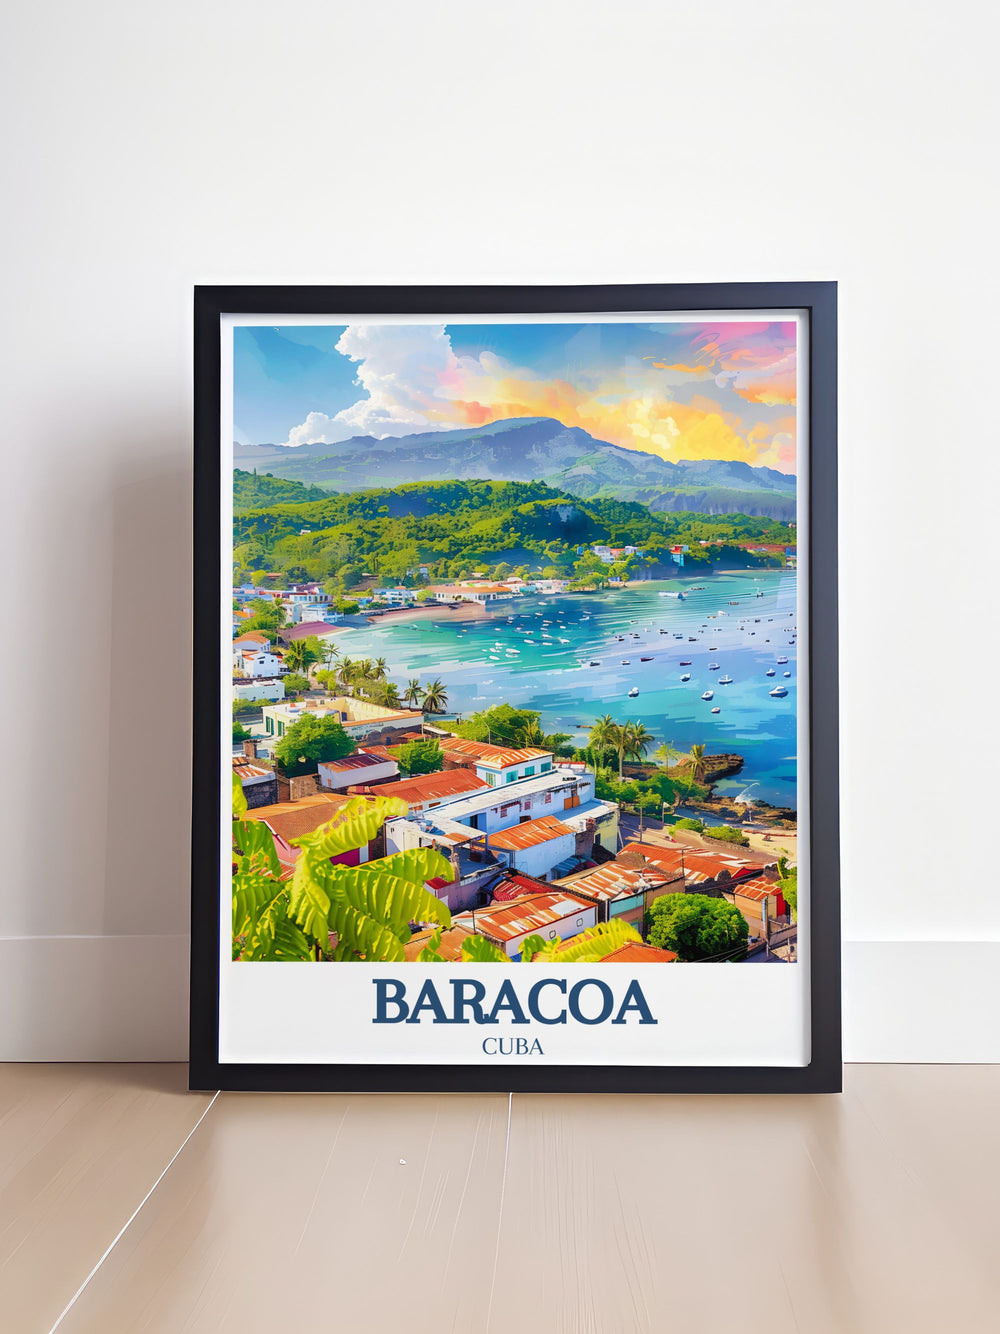 Beautiful Cuba print showcasing Baracoas majestic El Yunque Mountain, highlighting its lush vegetation and breathtaking views. Ideal for nature lovers and adding a scenic, adventurous touch to your living space.